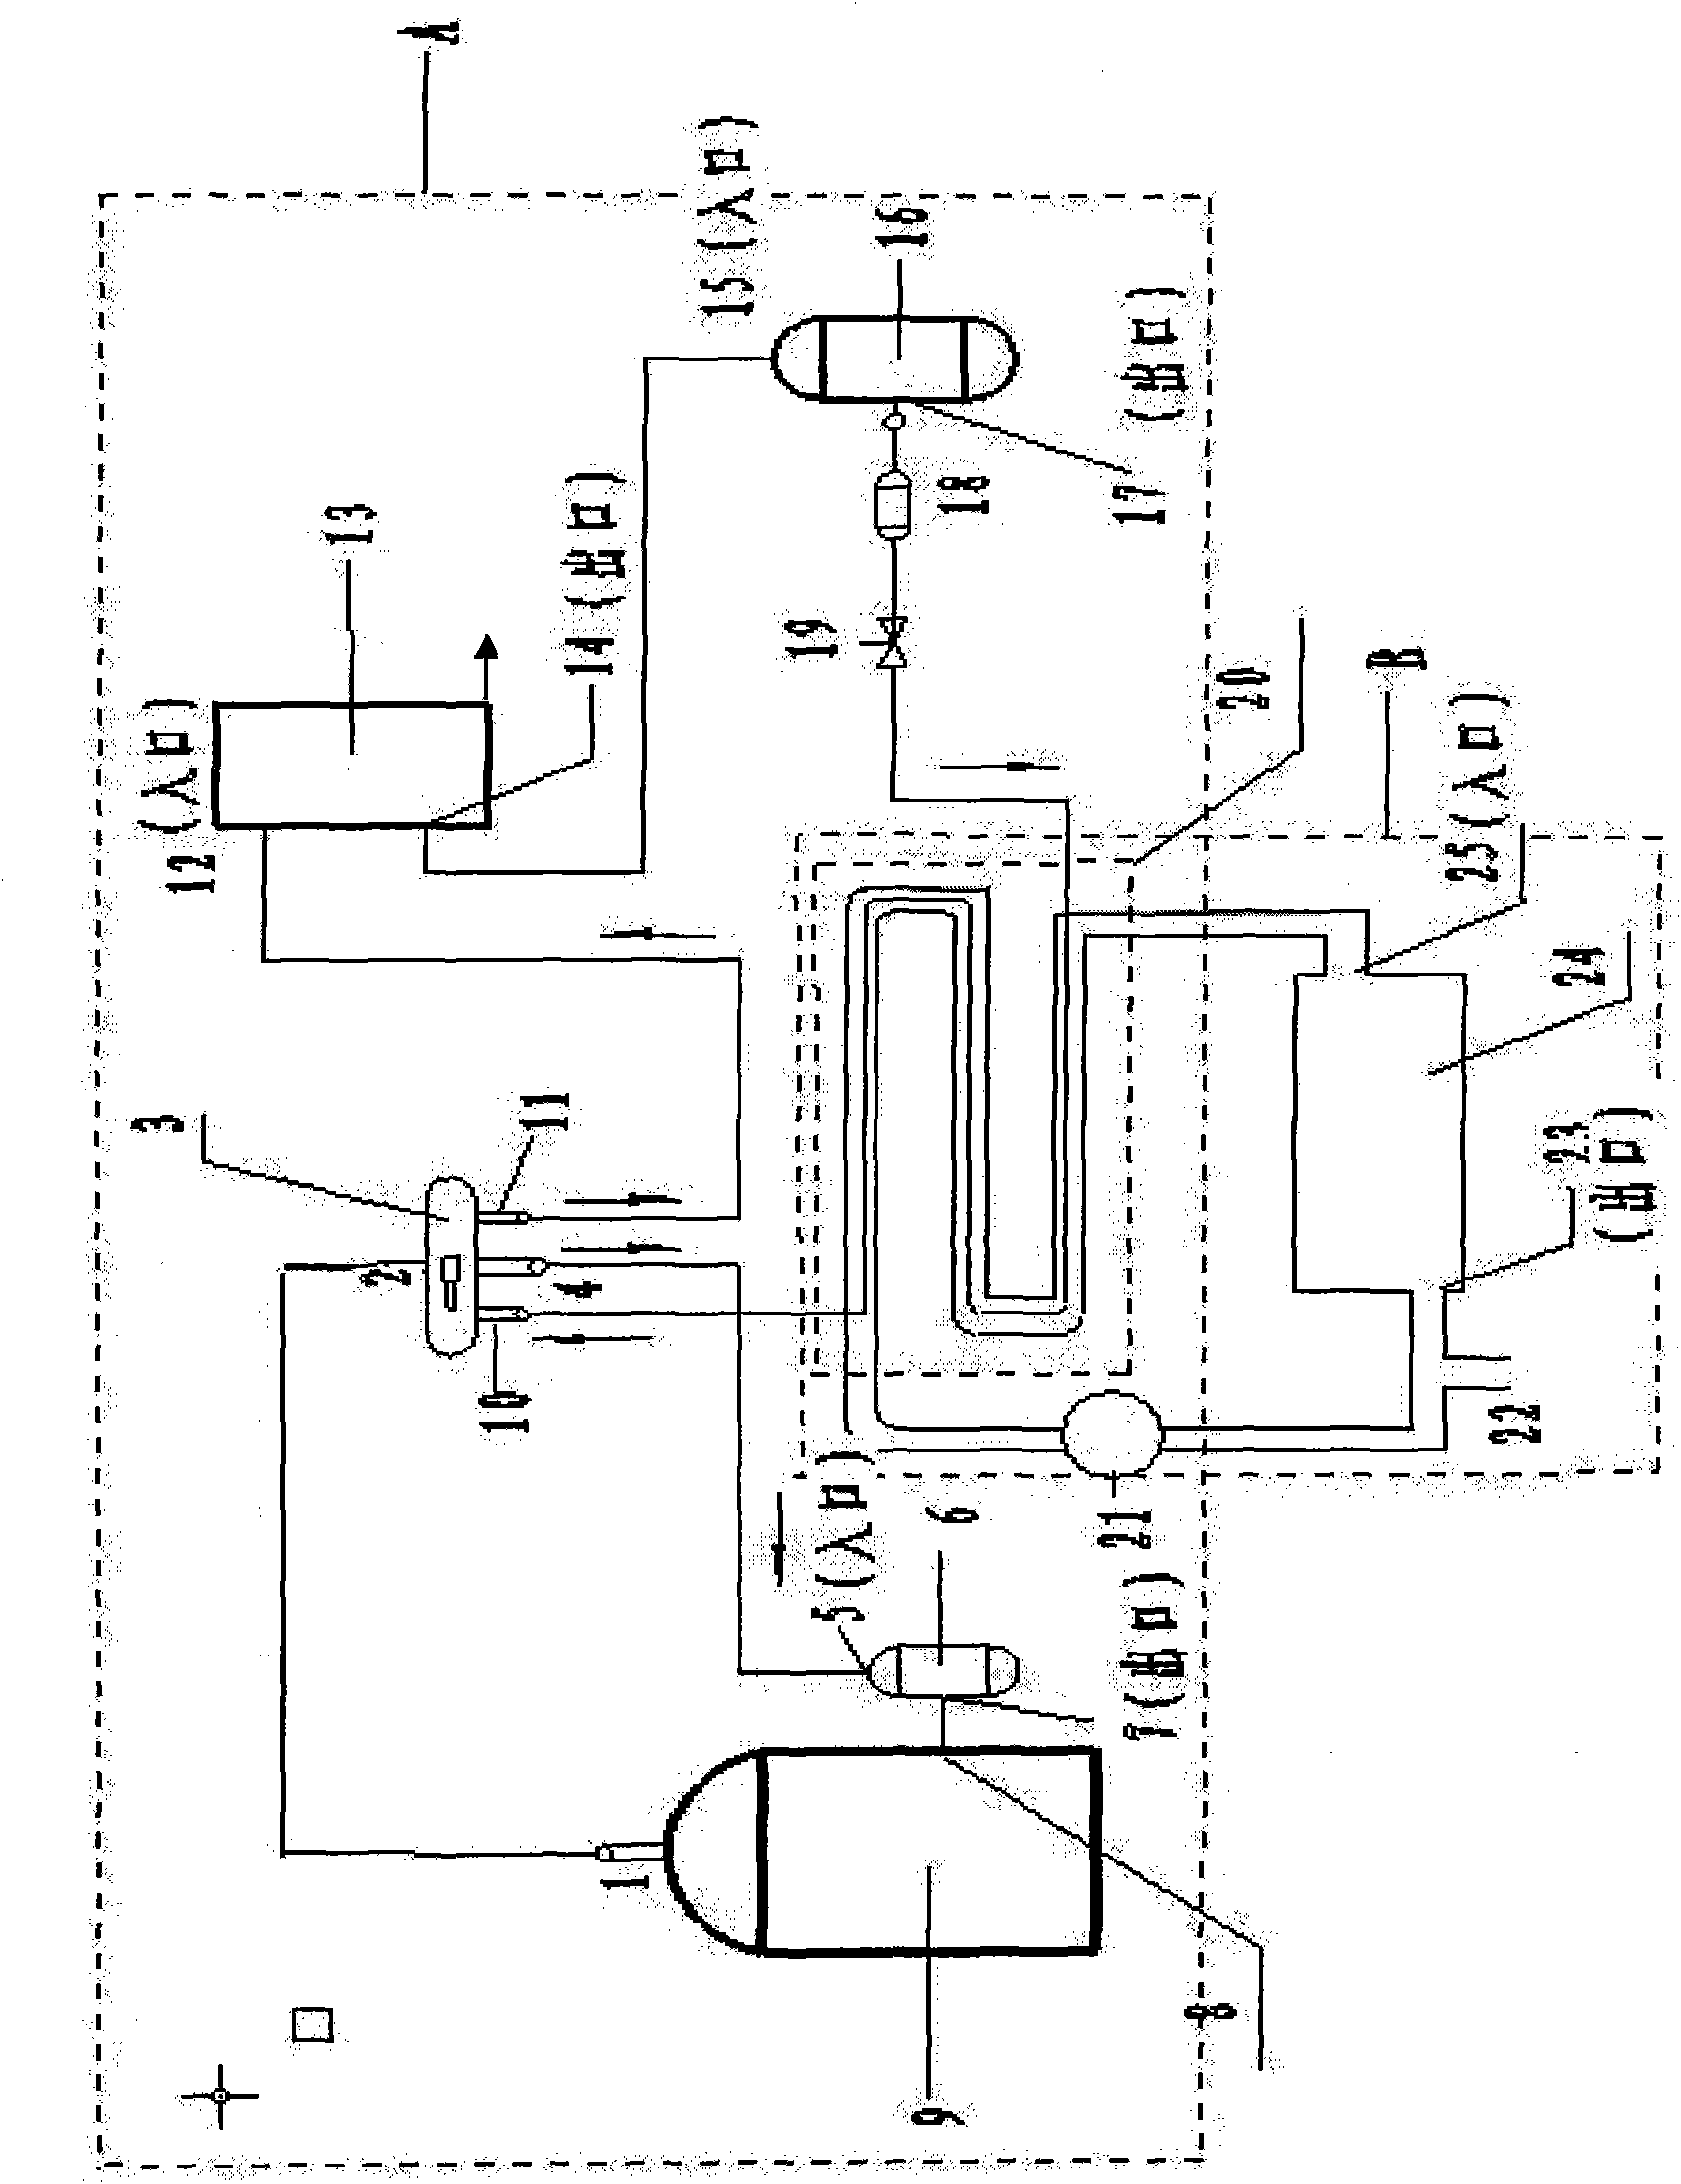 Temperature-controlled circulating curing system and application